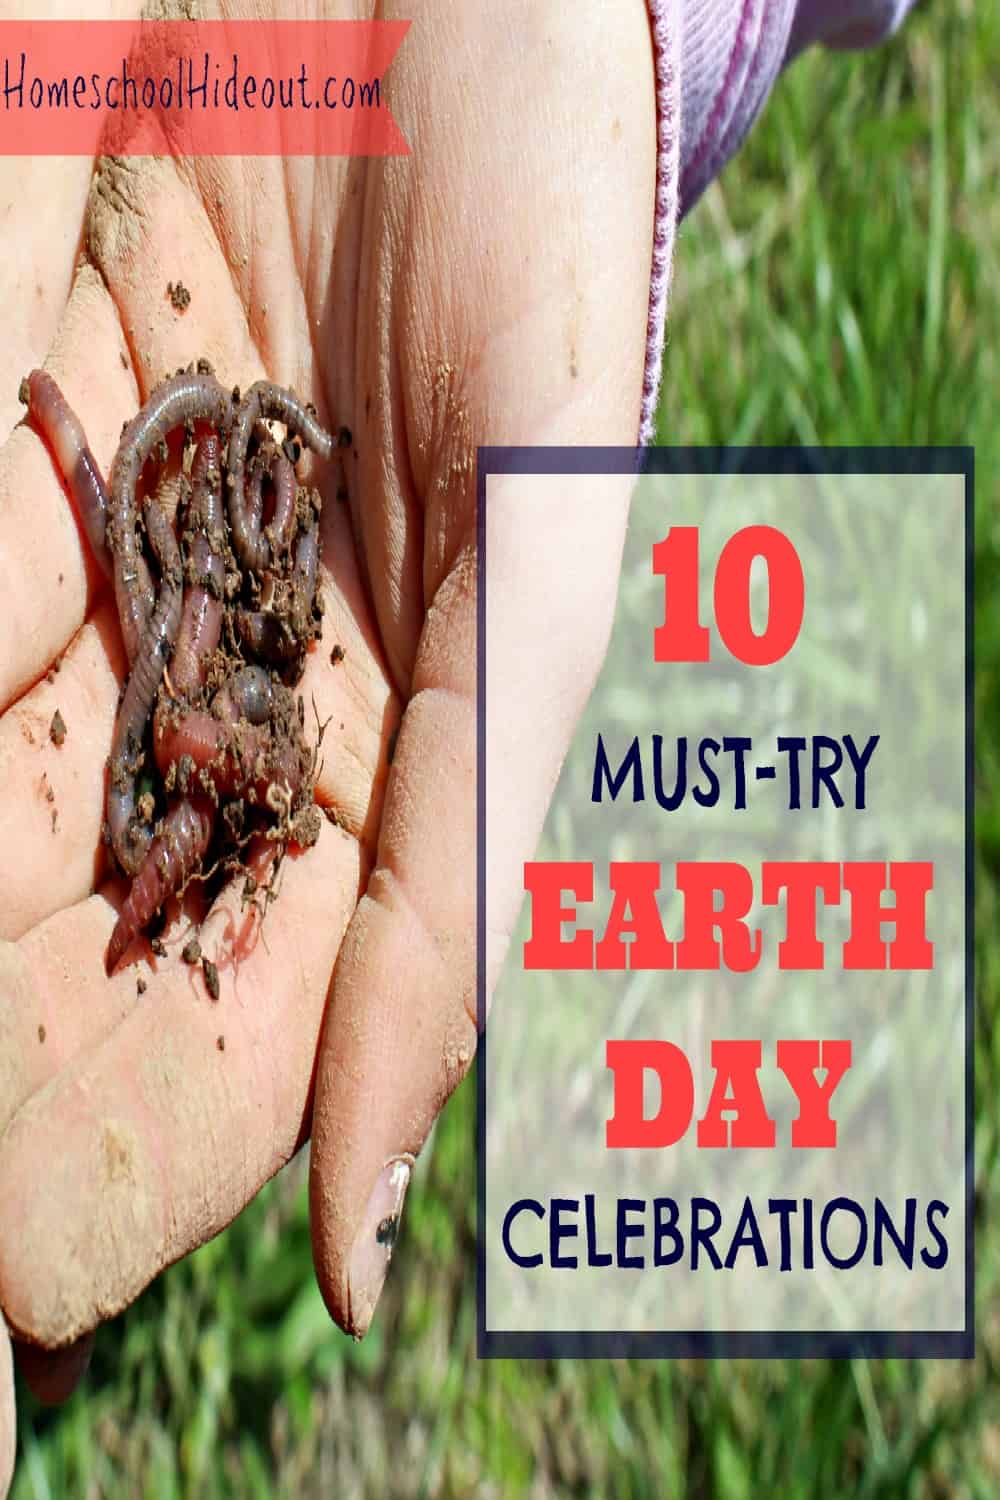 10 EASY and effective ways to celebrate Earth Day with kids! This one has some GREAT ideas!!!